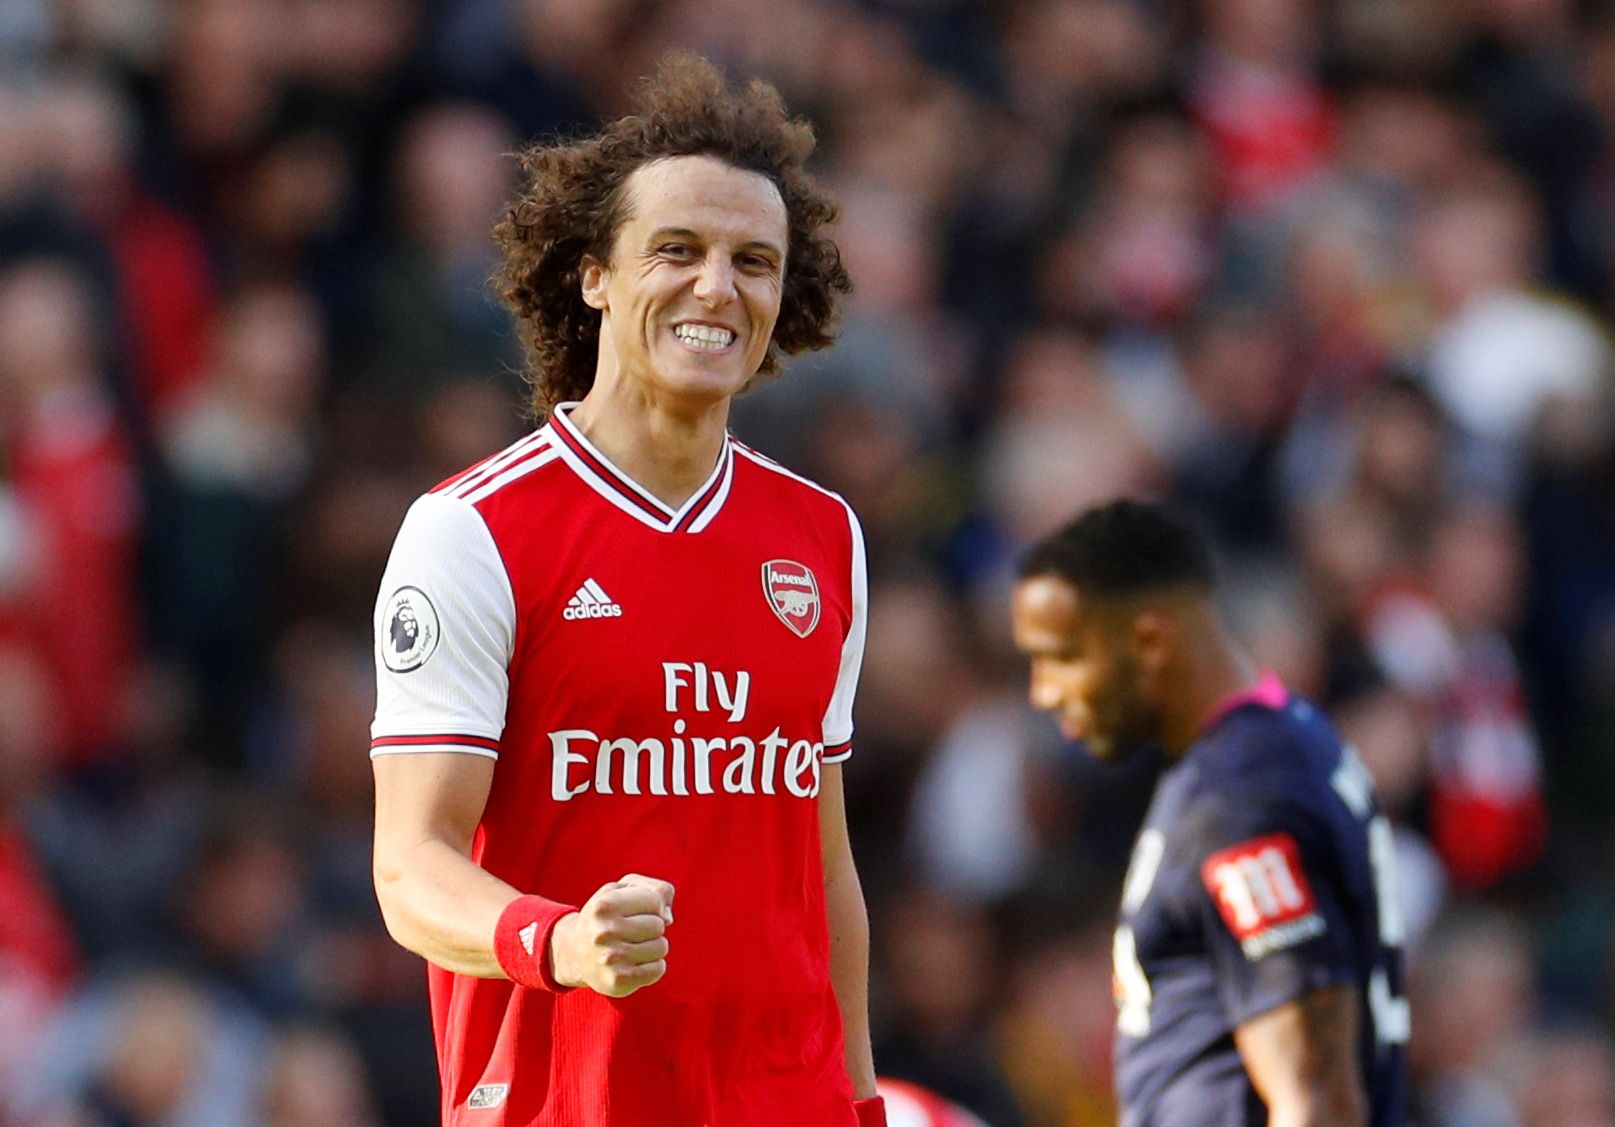 Soccer Football - Premier League - Arsenal v AFC Bournemouth - Emirates Stadium, London, Britain - October 6, 2019  Arsenal's David Luiz celebrates after the match       Action Images via Reuters/John Sibley  EDITORIAL USE ONLY. No use with unauthorized audio, video, data, fixture lists, club/league logos or 